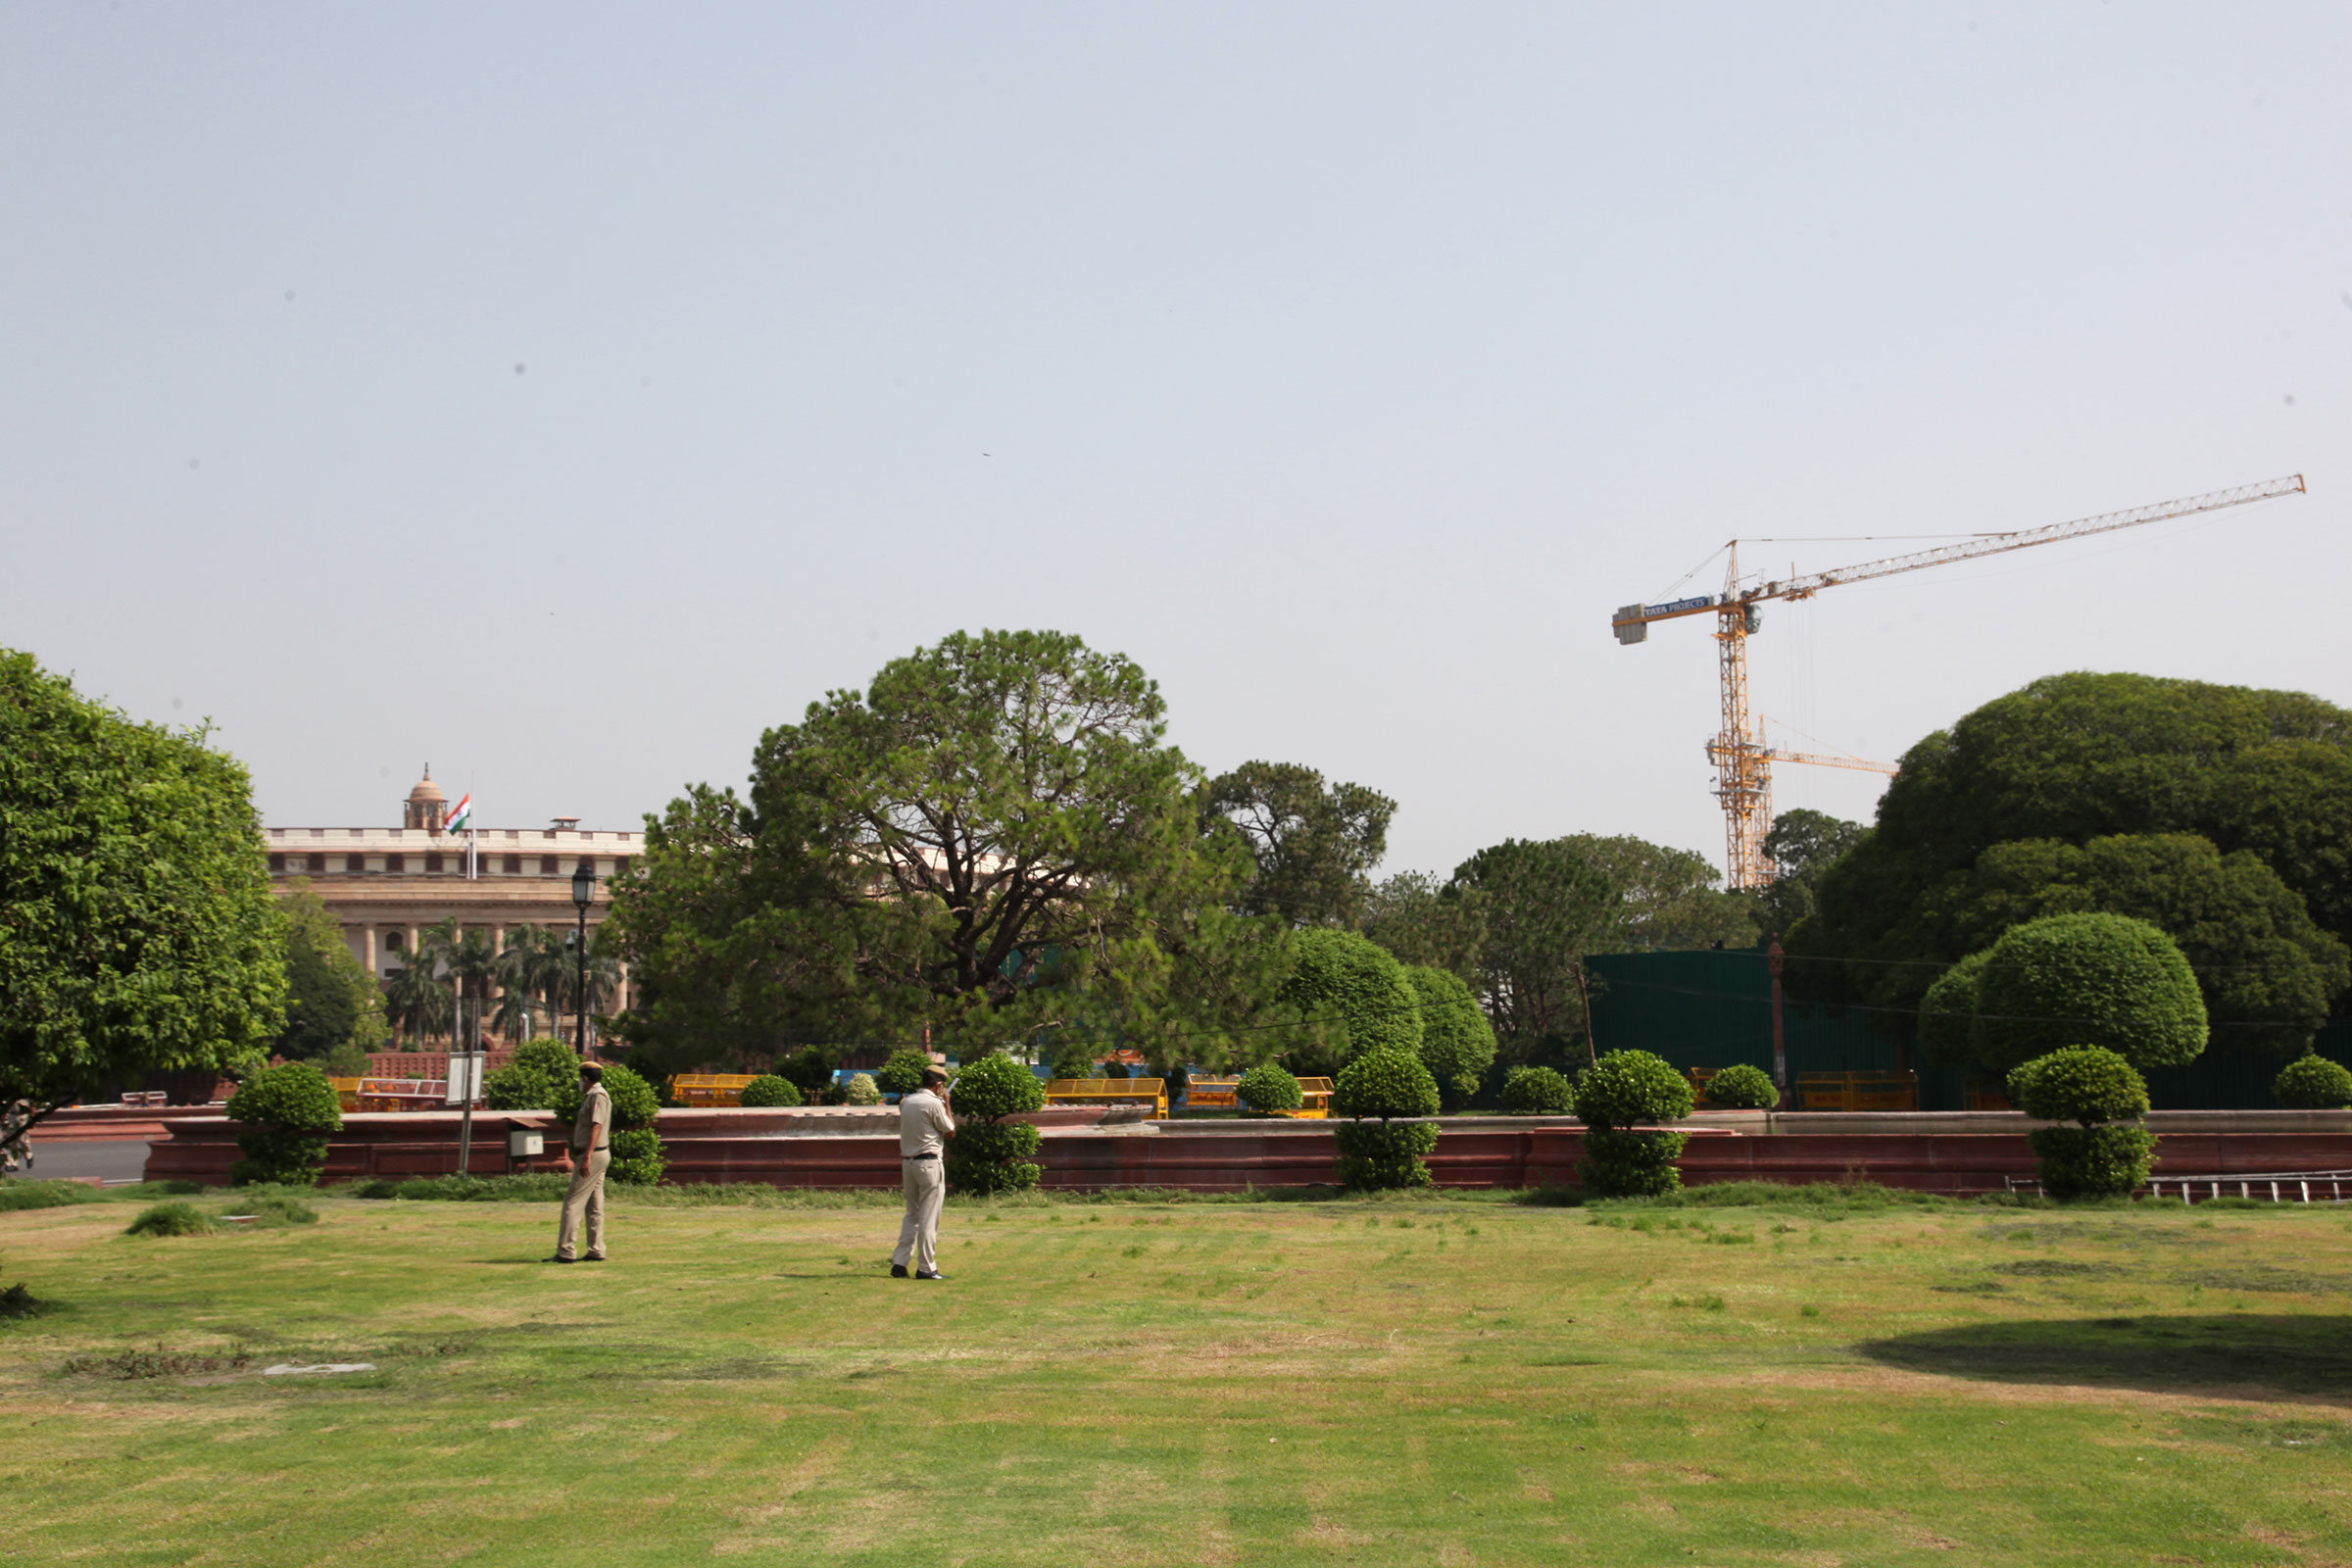 The round heritage building of the Indian Parliament can be seen with massive cranes for the construction of the new Parliament building on June 5, 2021. (Pallava Bagla—Corbis/Getty Images)